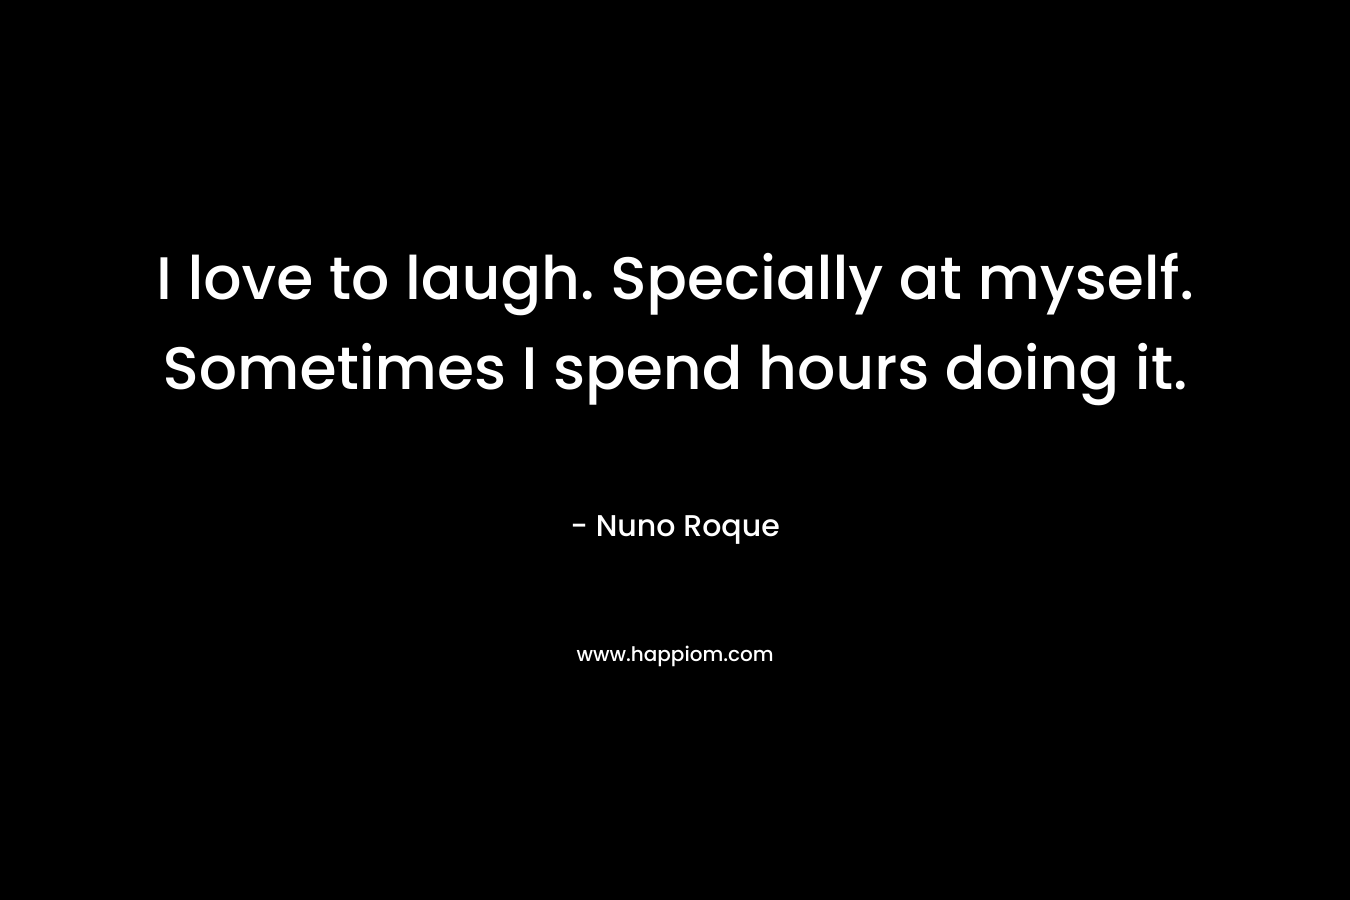 I love to laugh. Specially at myself. Sometimes I spend hours doing it.